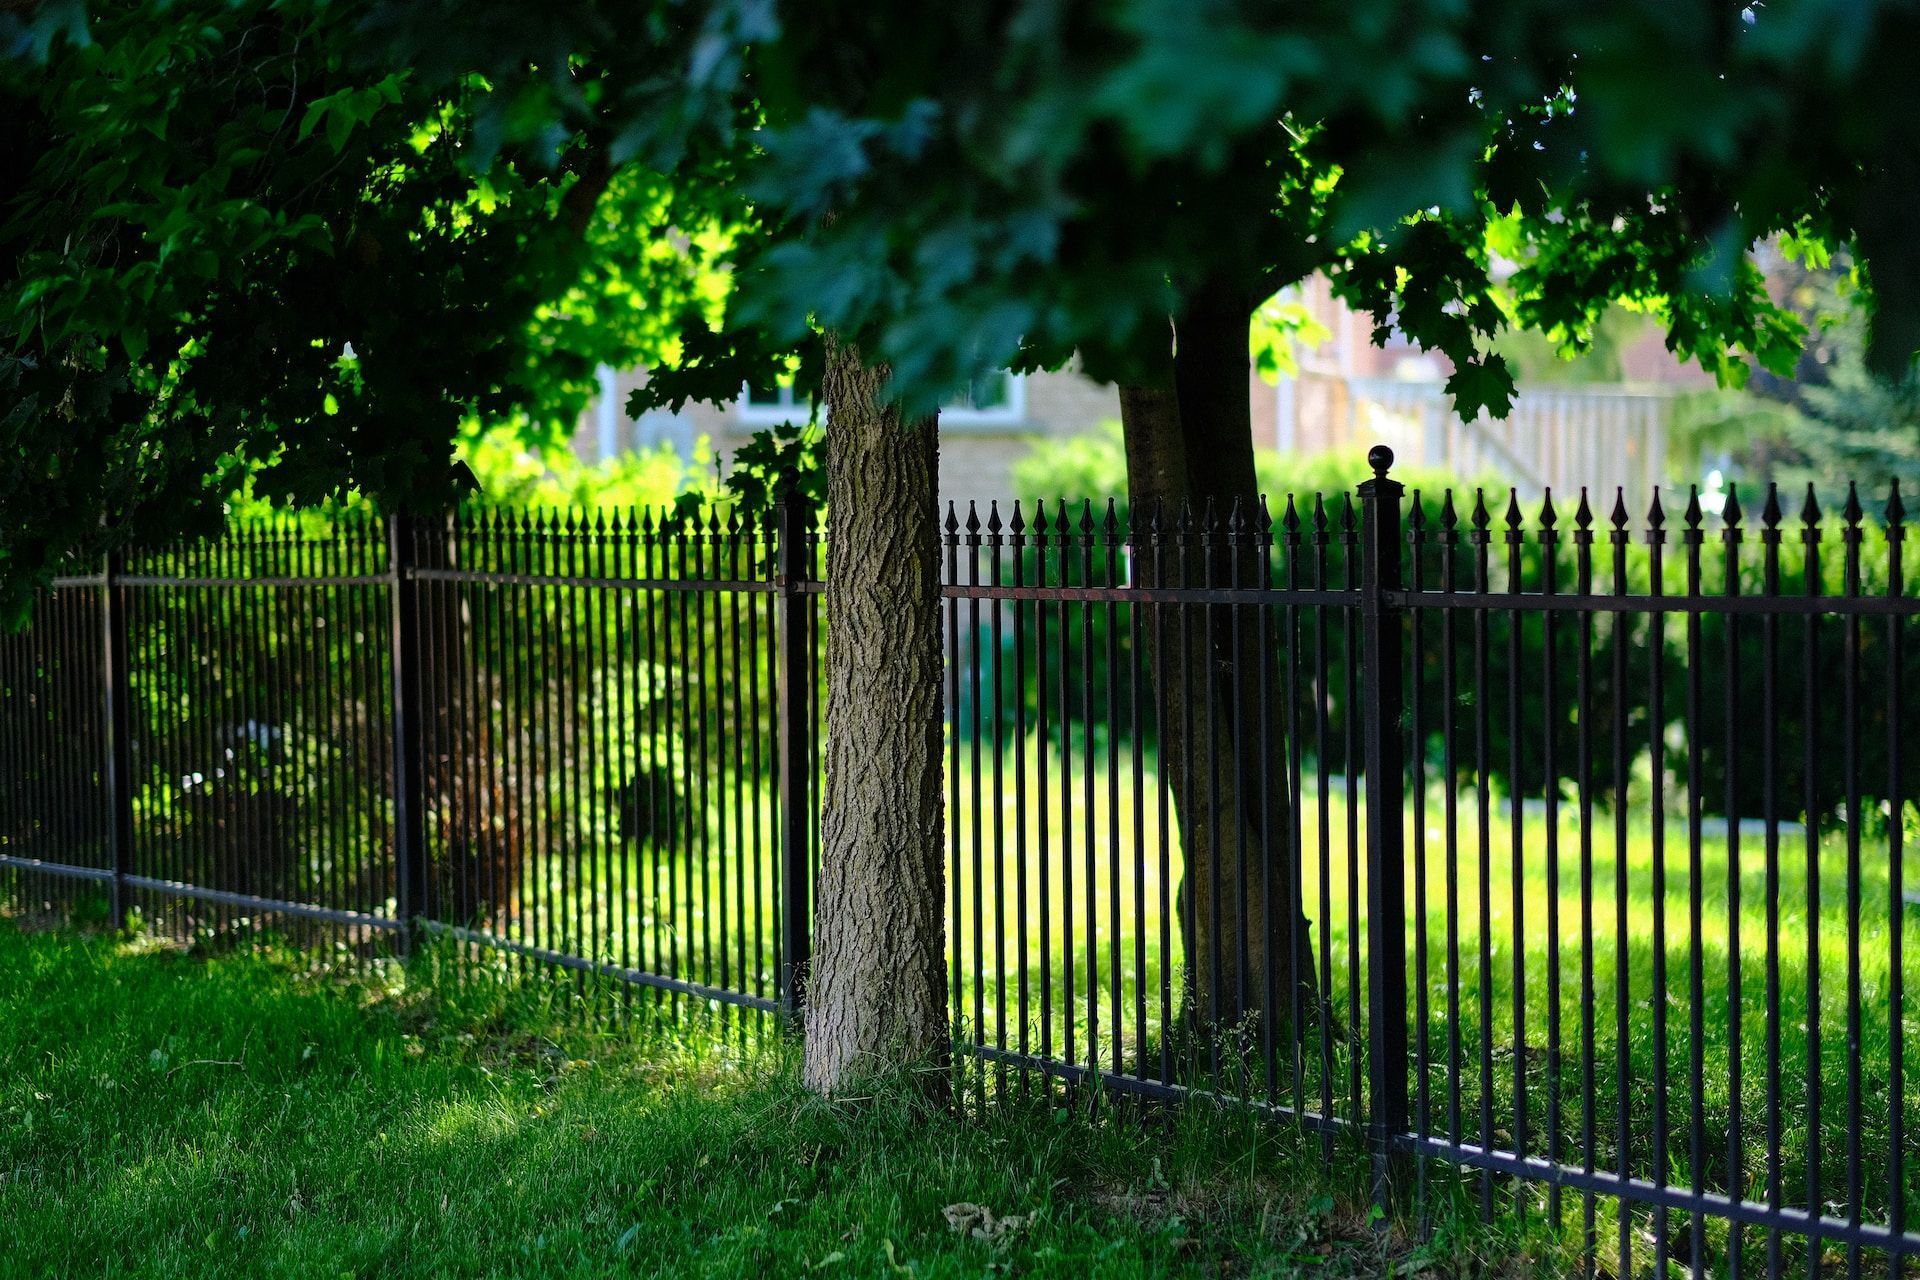 A metal fence passing through a garden with trees.